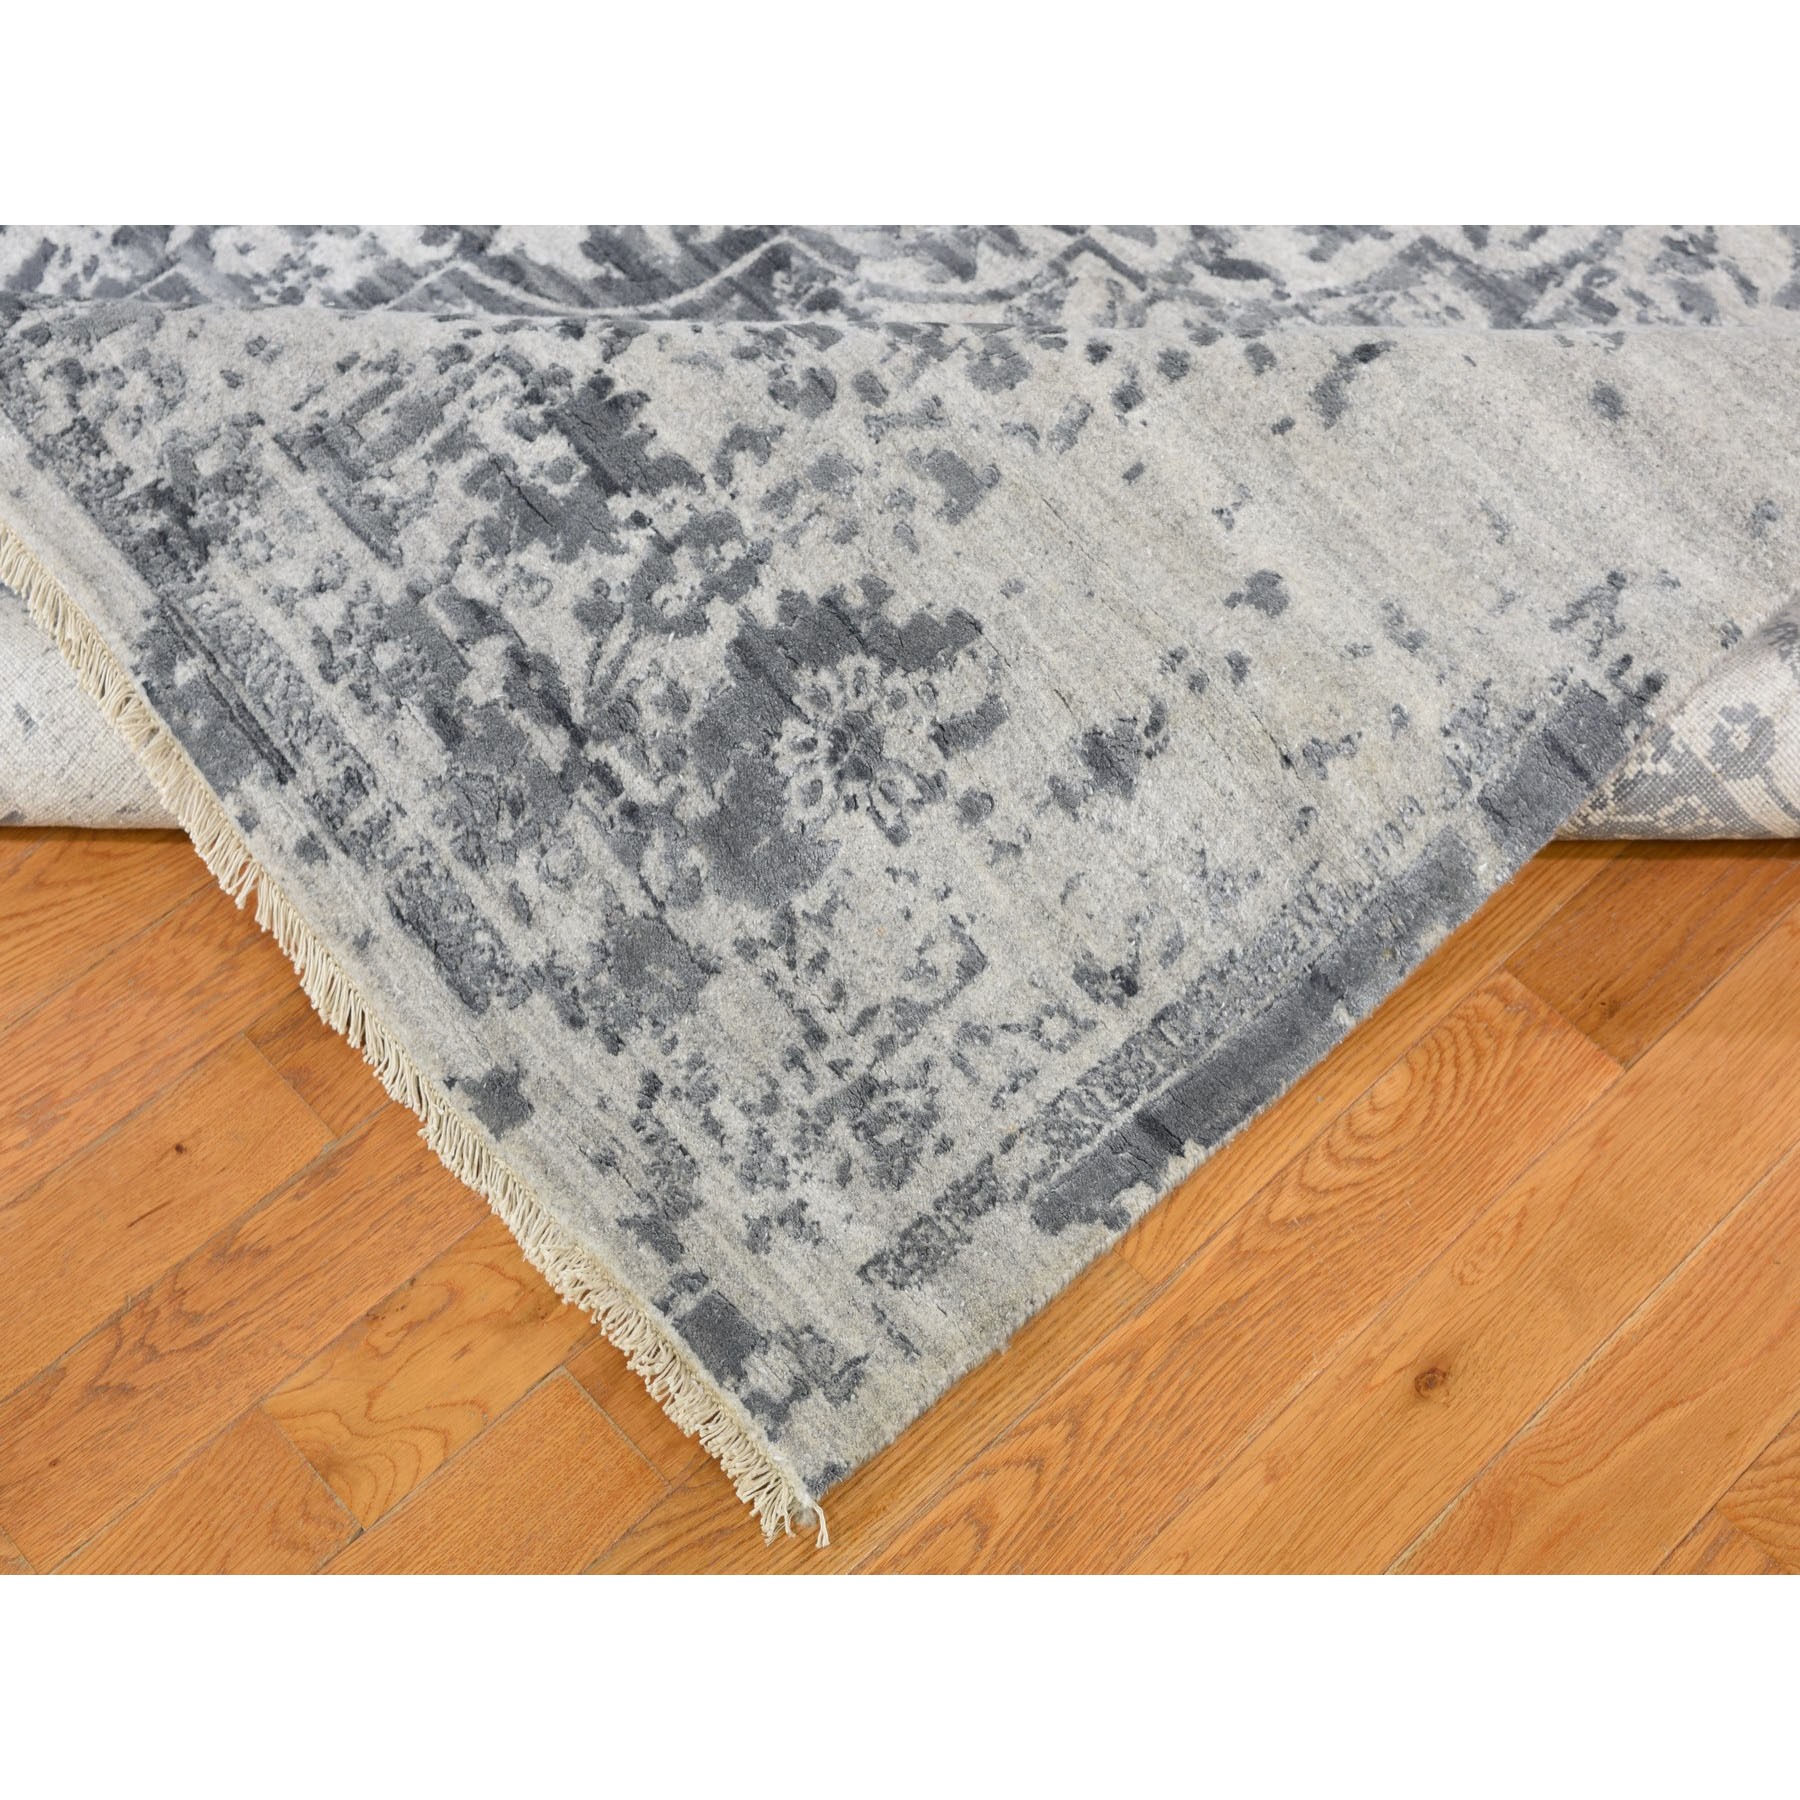 10-x14- Silver-Dark Gray Erased Persian Design Wool and Pure Silk Hand Knotted Oriental Rug 